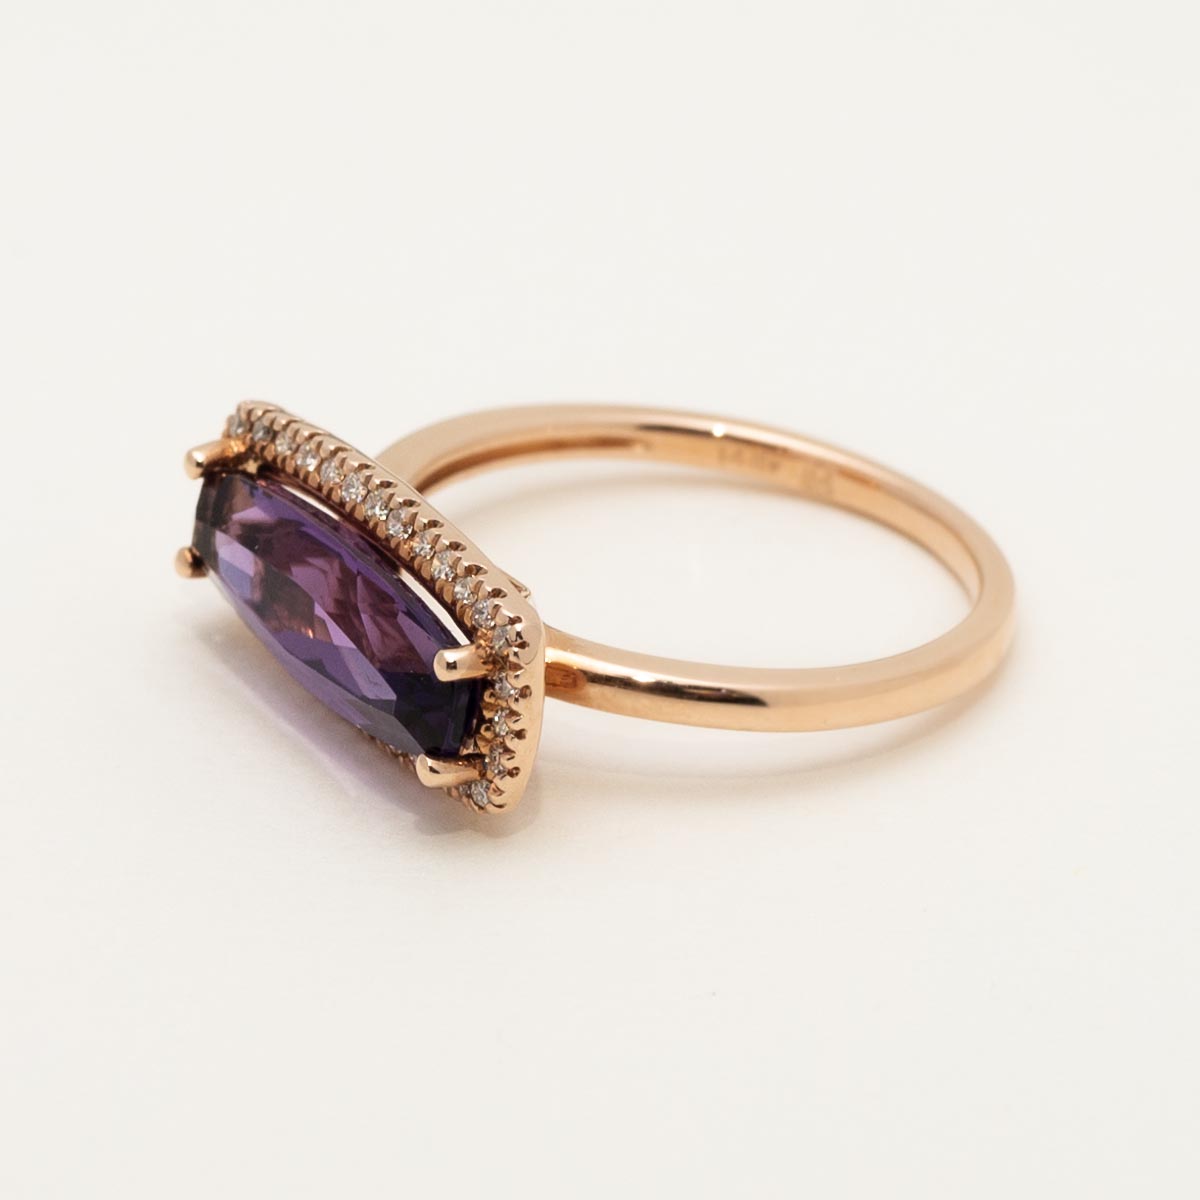 Cushion Cut Amethyst Ring in 14kt Rose Gold with Diamonds (1/7ct tw)